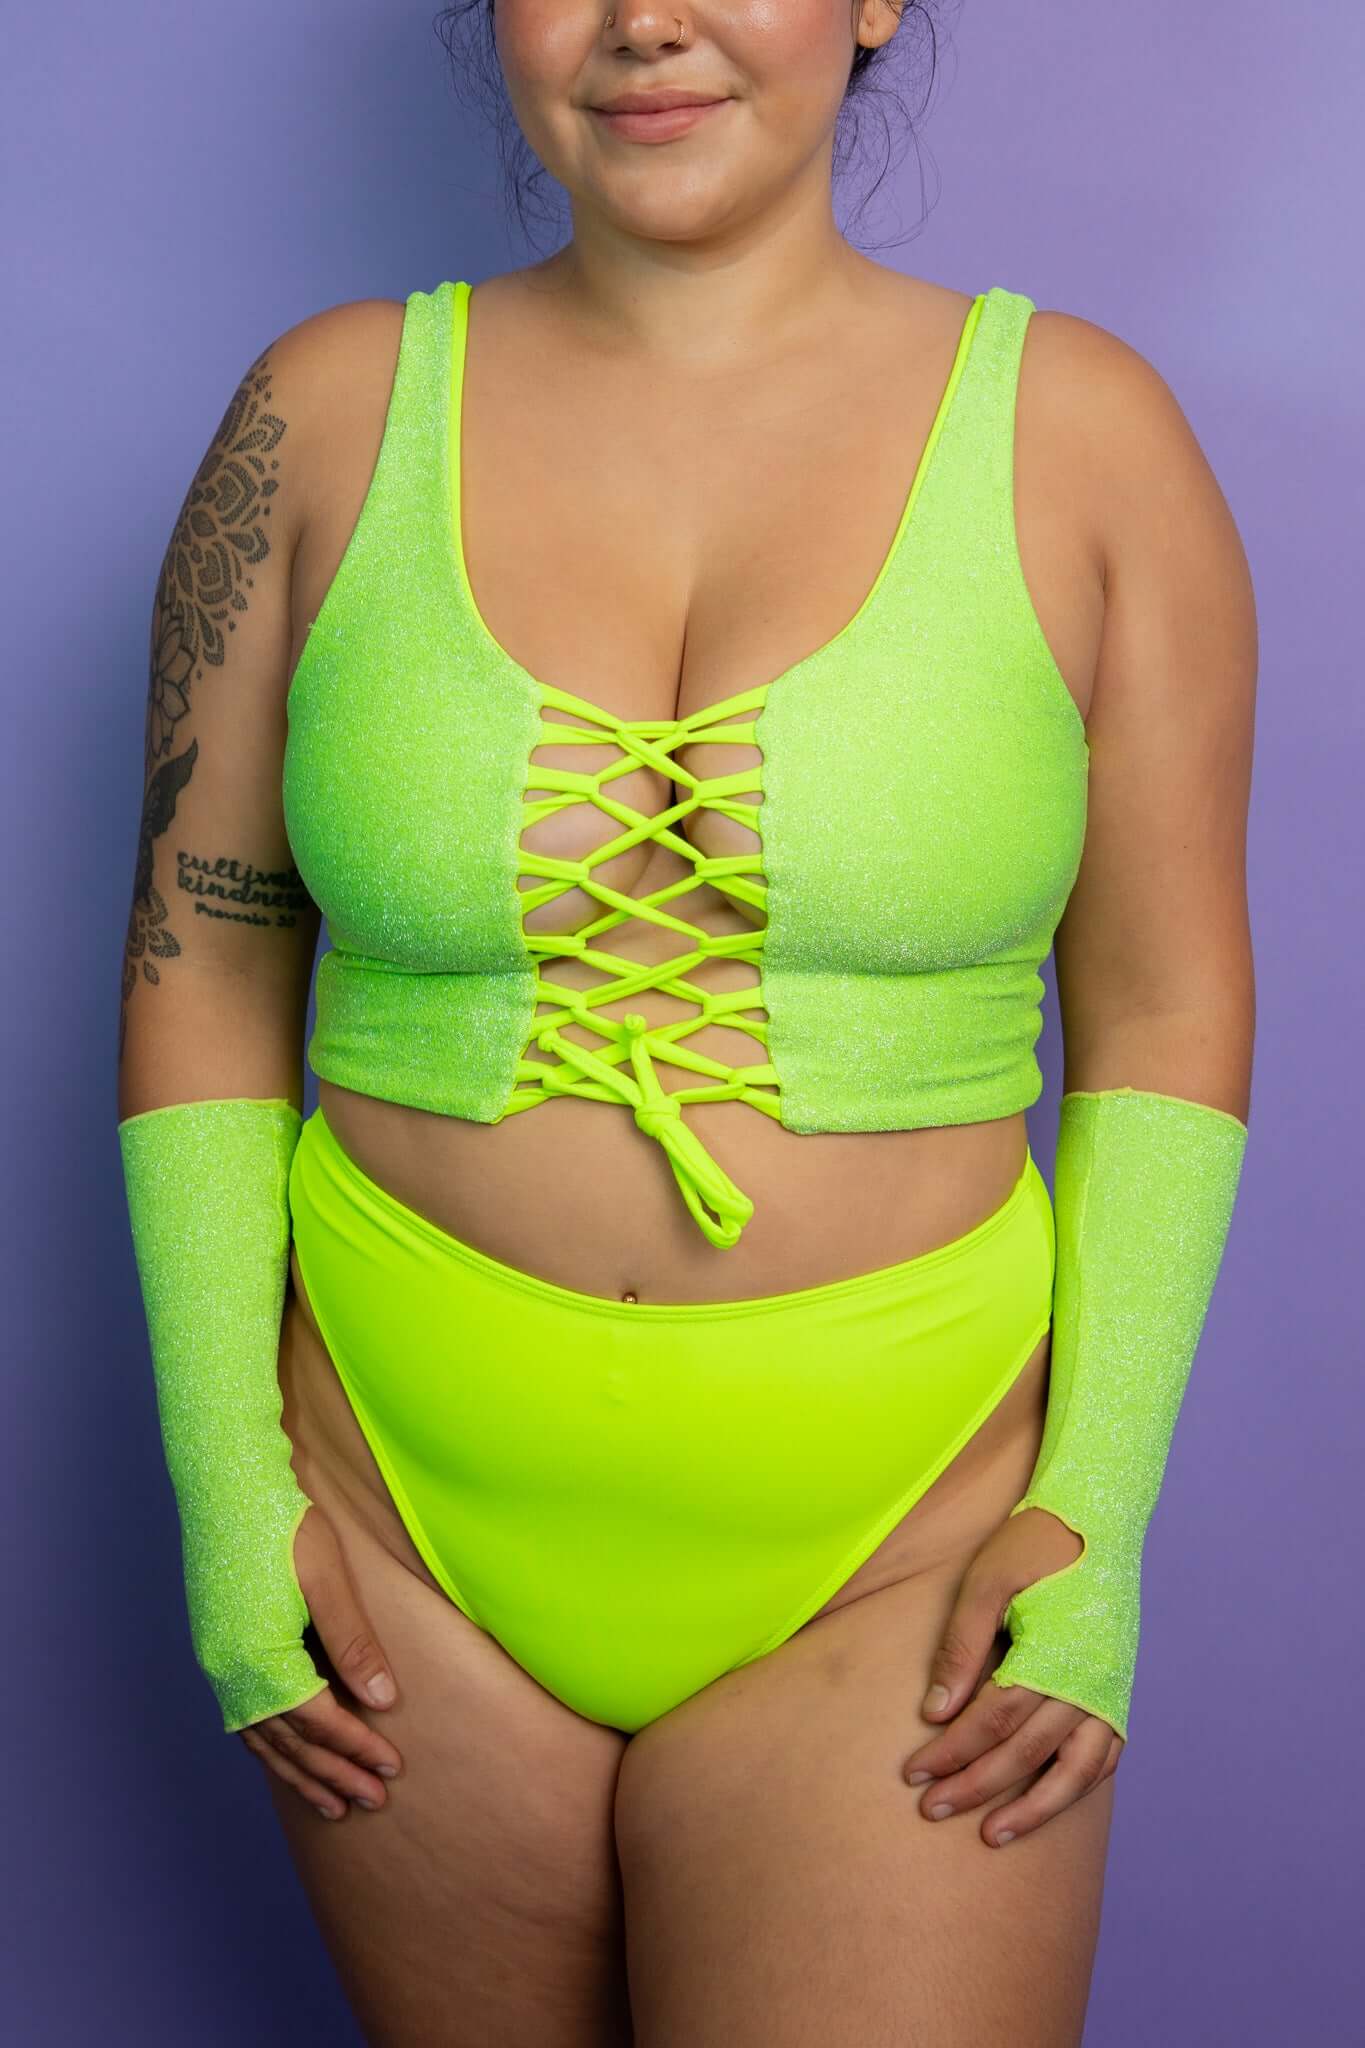 Pixie Dust Lace Up Top Freedom Rave Wear Size: X-Small